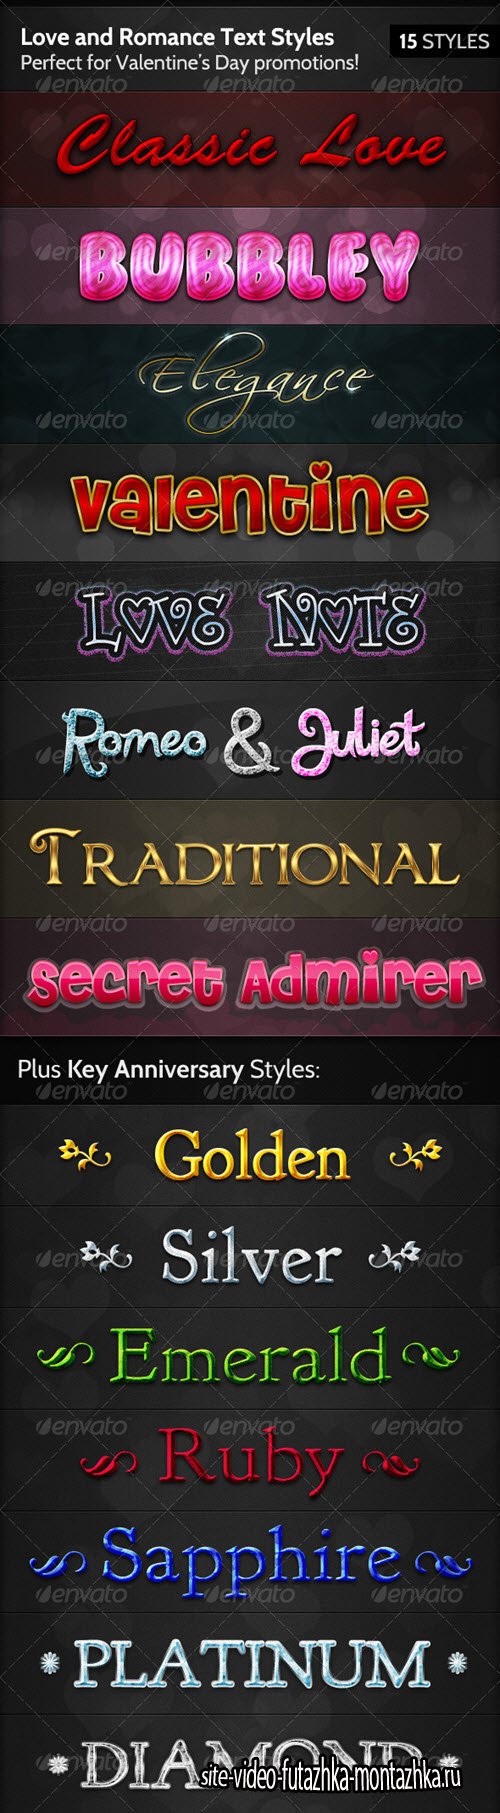 GraphicRiver - Love and Romance Text Styles